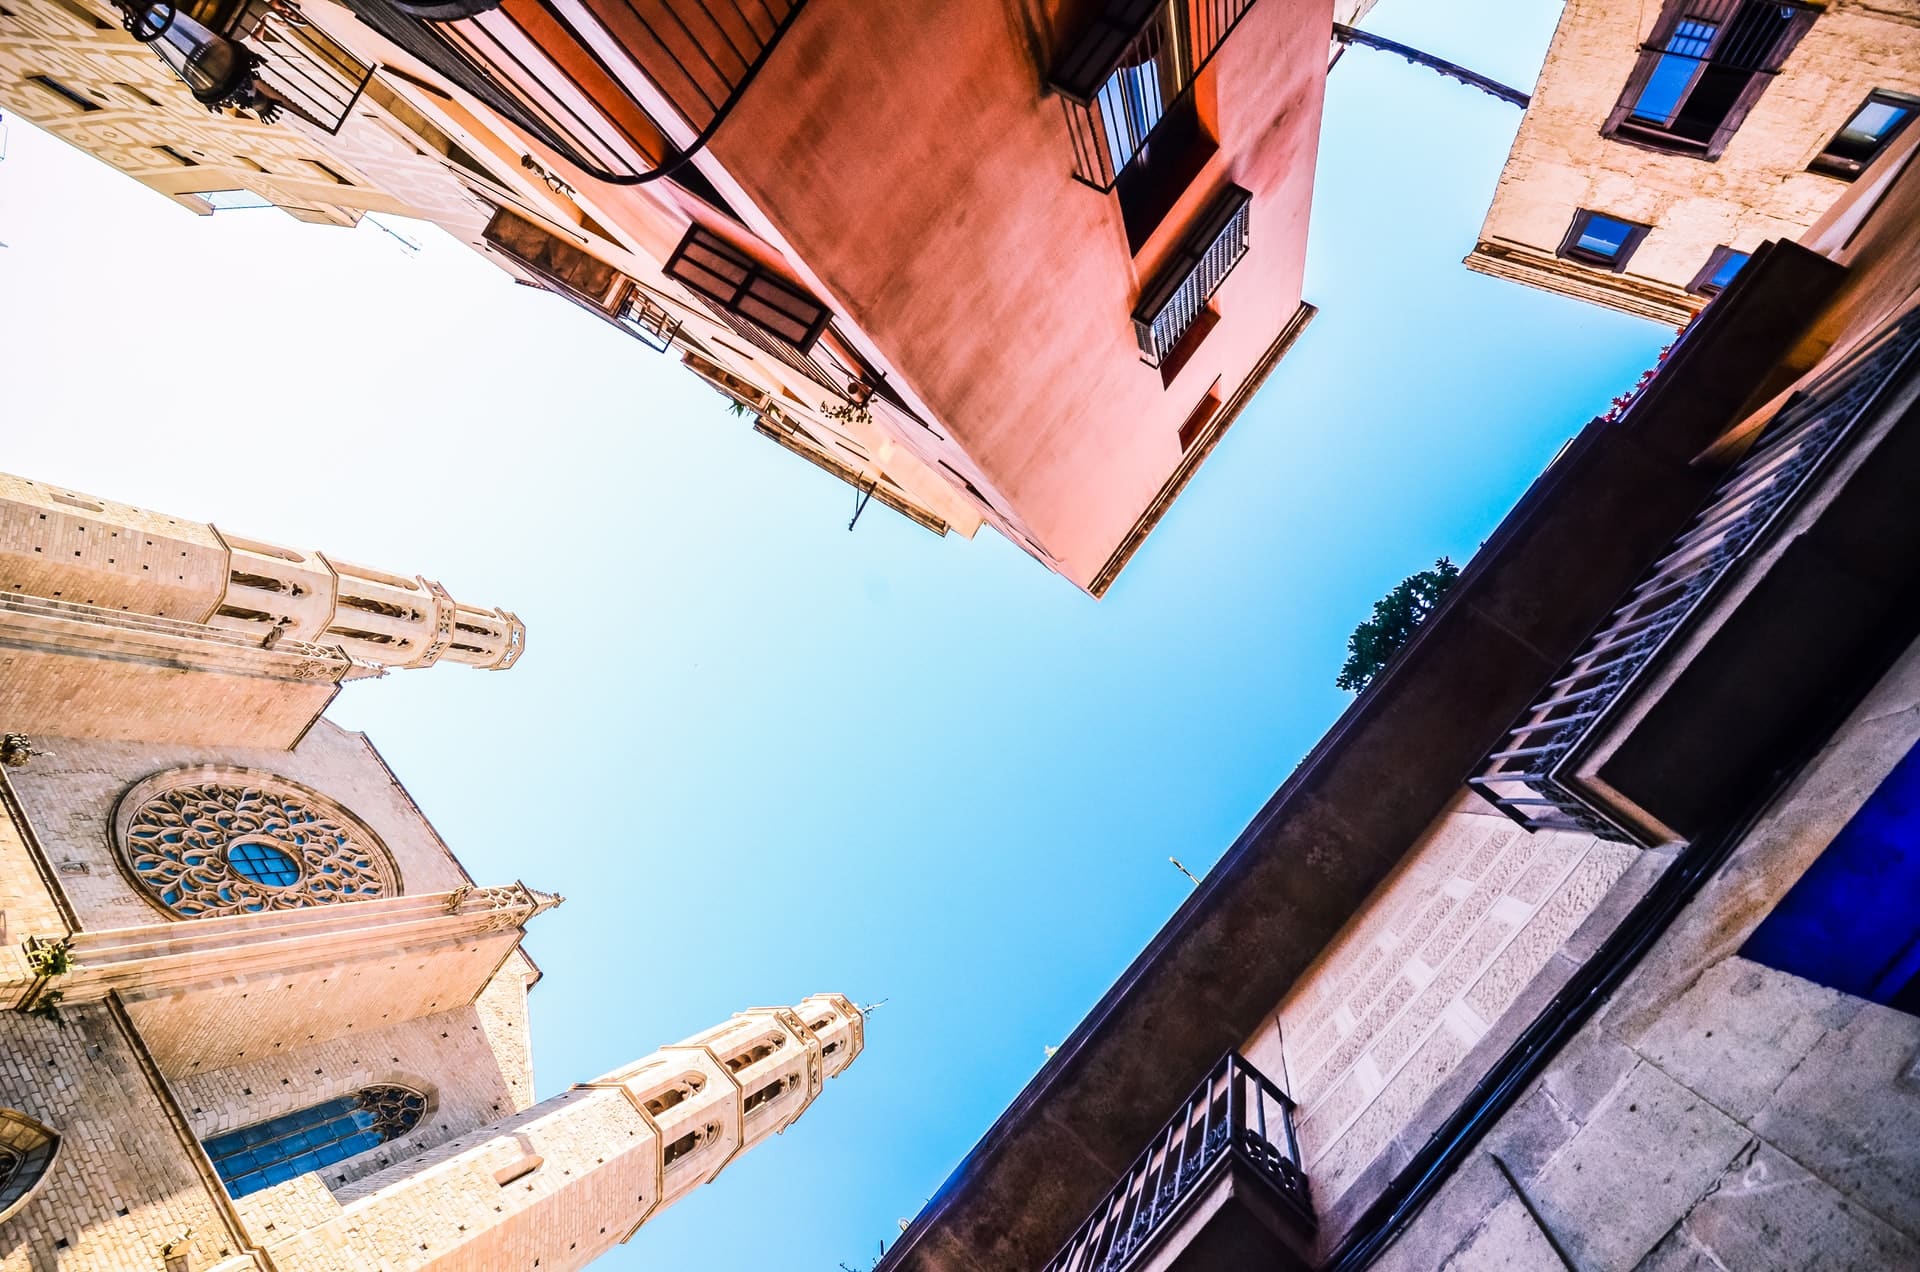 Home to the Church of Santa María del Mar, Picasso Museum, and Palau de la Música Catalana, El Born is an attraction-packed quarter and one of the best areas to stay in Barcelona